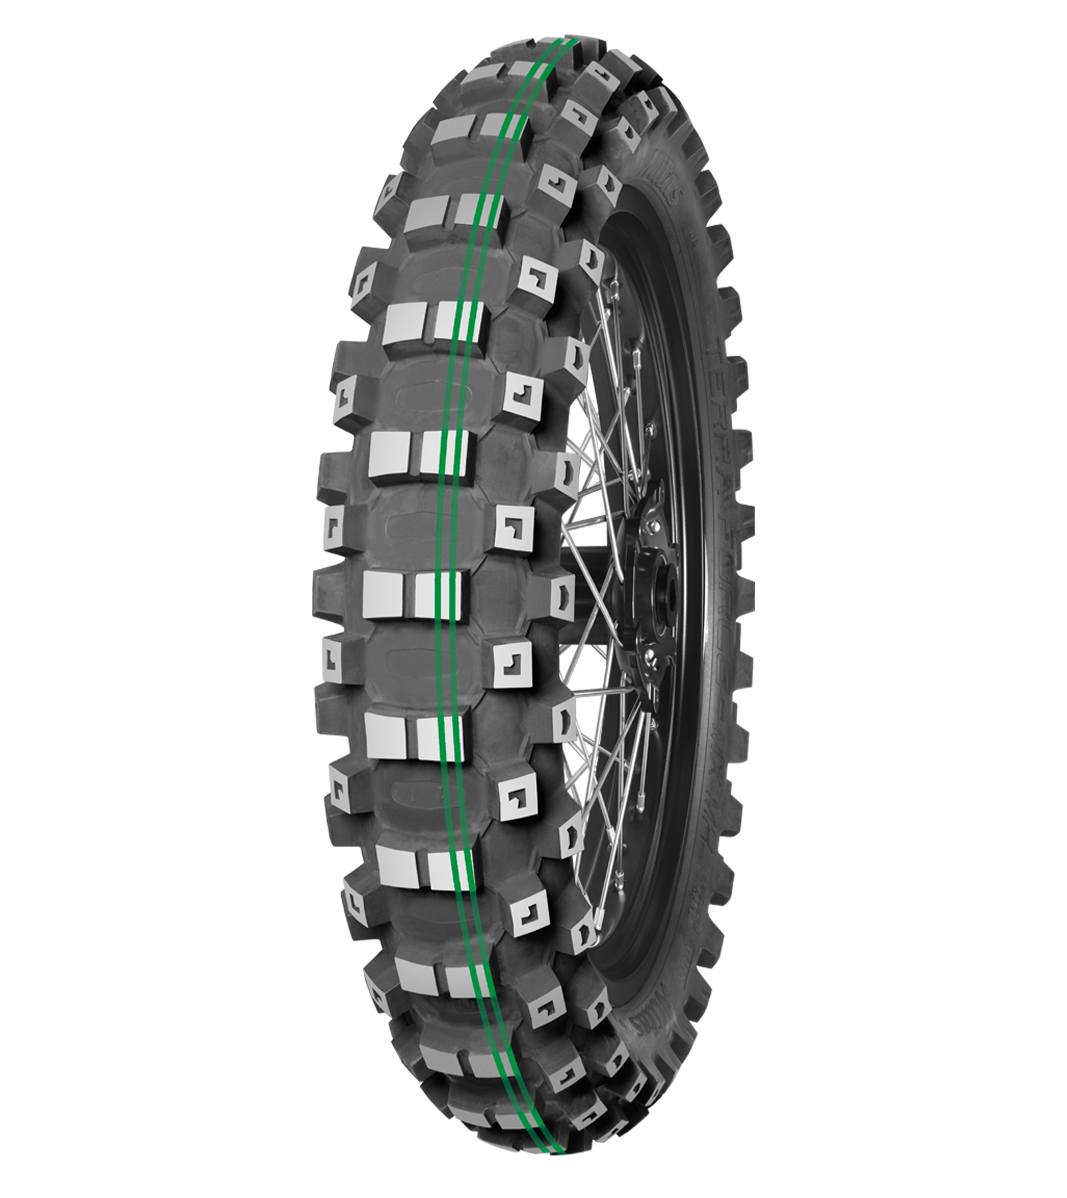 Mitas TERRA FORCE-MX MH 120/90-18 Enduro Competition Off-Road SUPER SOFT EXTREME 65M 2 Green Tube Rear Tire, 226354, 120/90-18, Enduro Competition, Off-Road, Rear, Terra Force, Terra Force-MX MH, Trail, Tires - Imported and distributed in North & South America by Lindeco Genuine Powersports - Premier Powersports Equipment and Accessories for Motorcycle Enthusiasts, Professional Riders and Dealers.